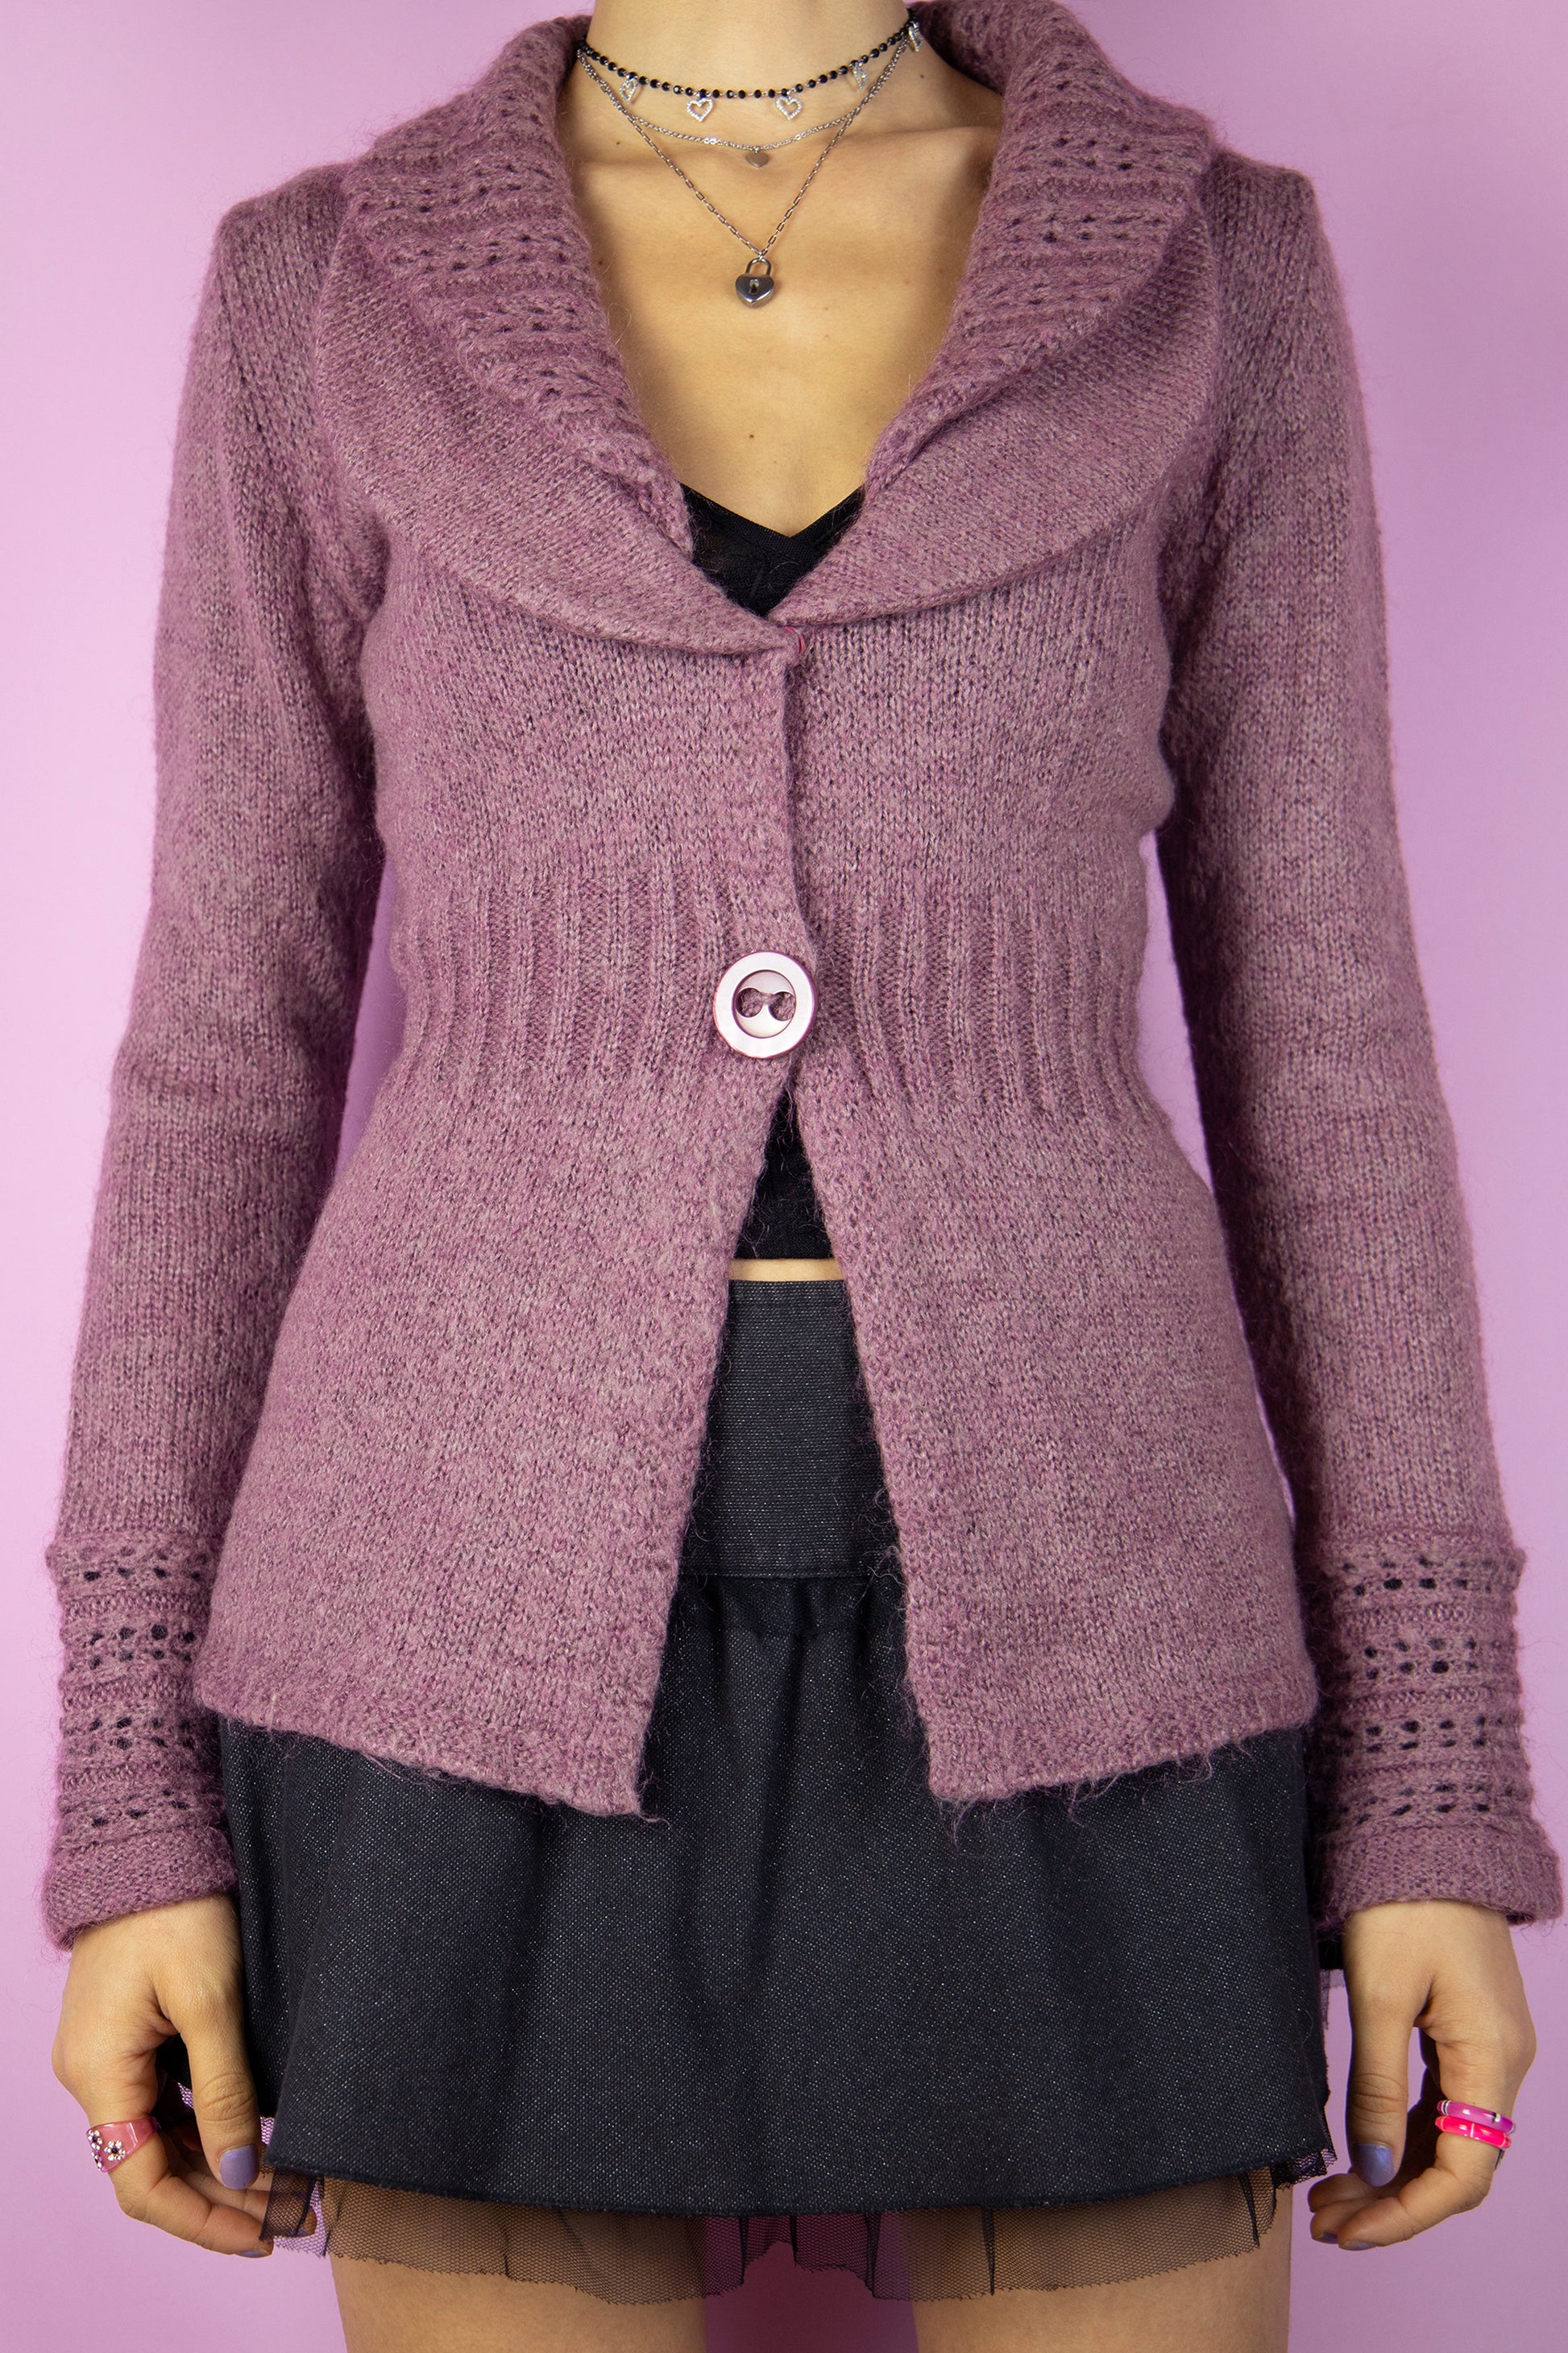 The Y2K Fairy Pink Knit Cardigan is a vintage mauve pink cardigan with a double collar and two-button closure. Boho romantic 2000s sweater.